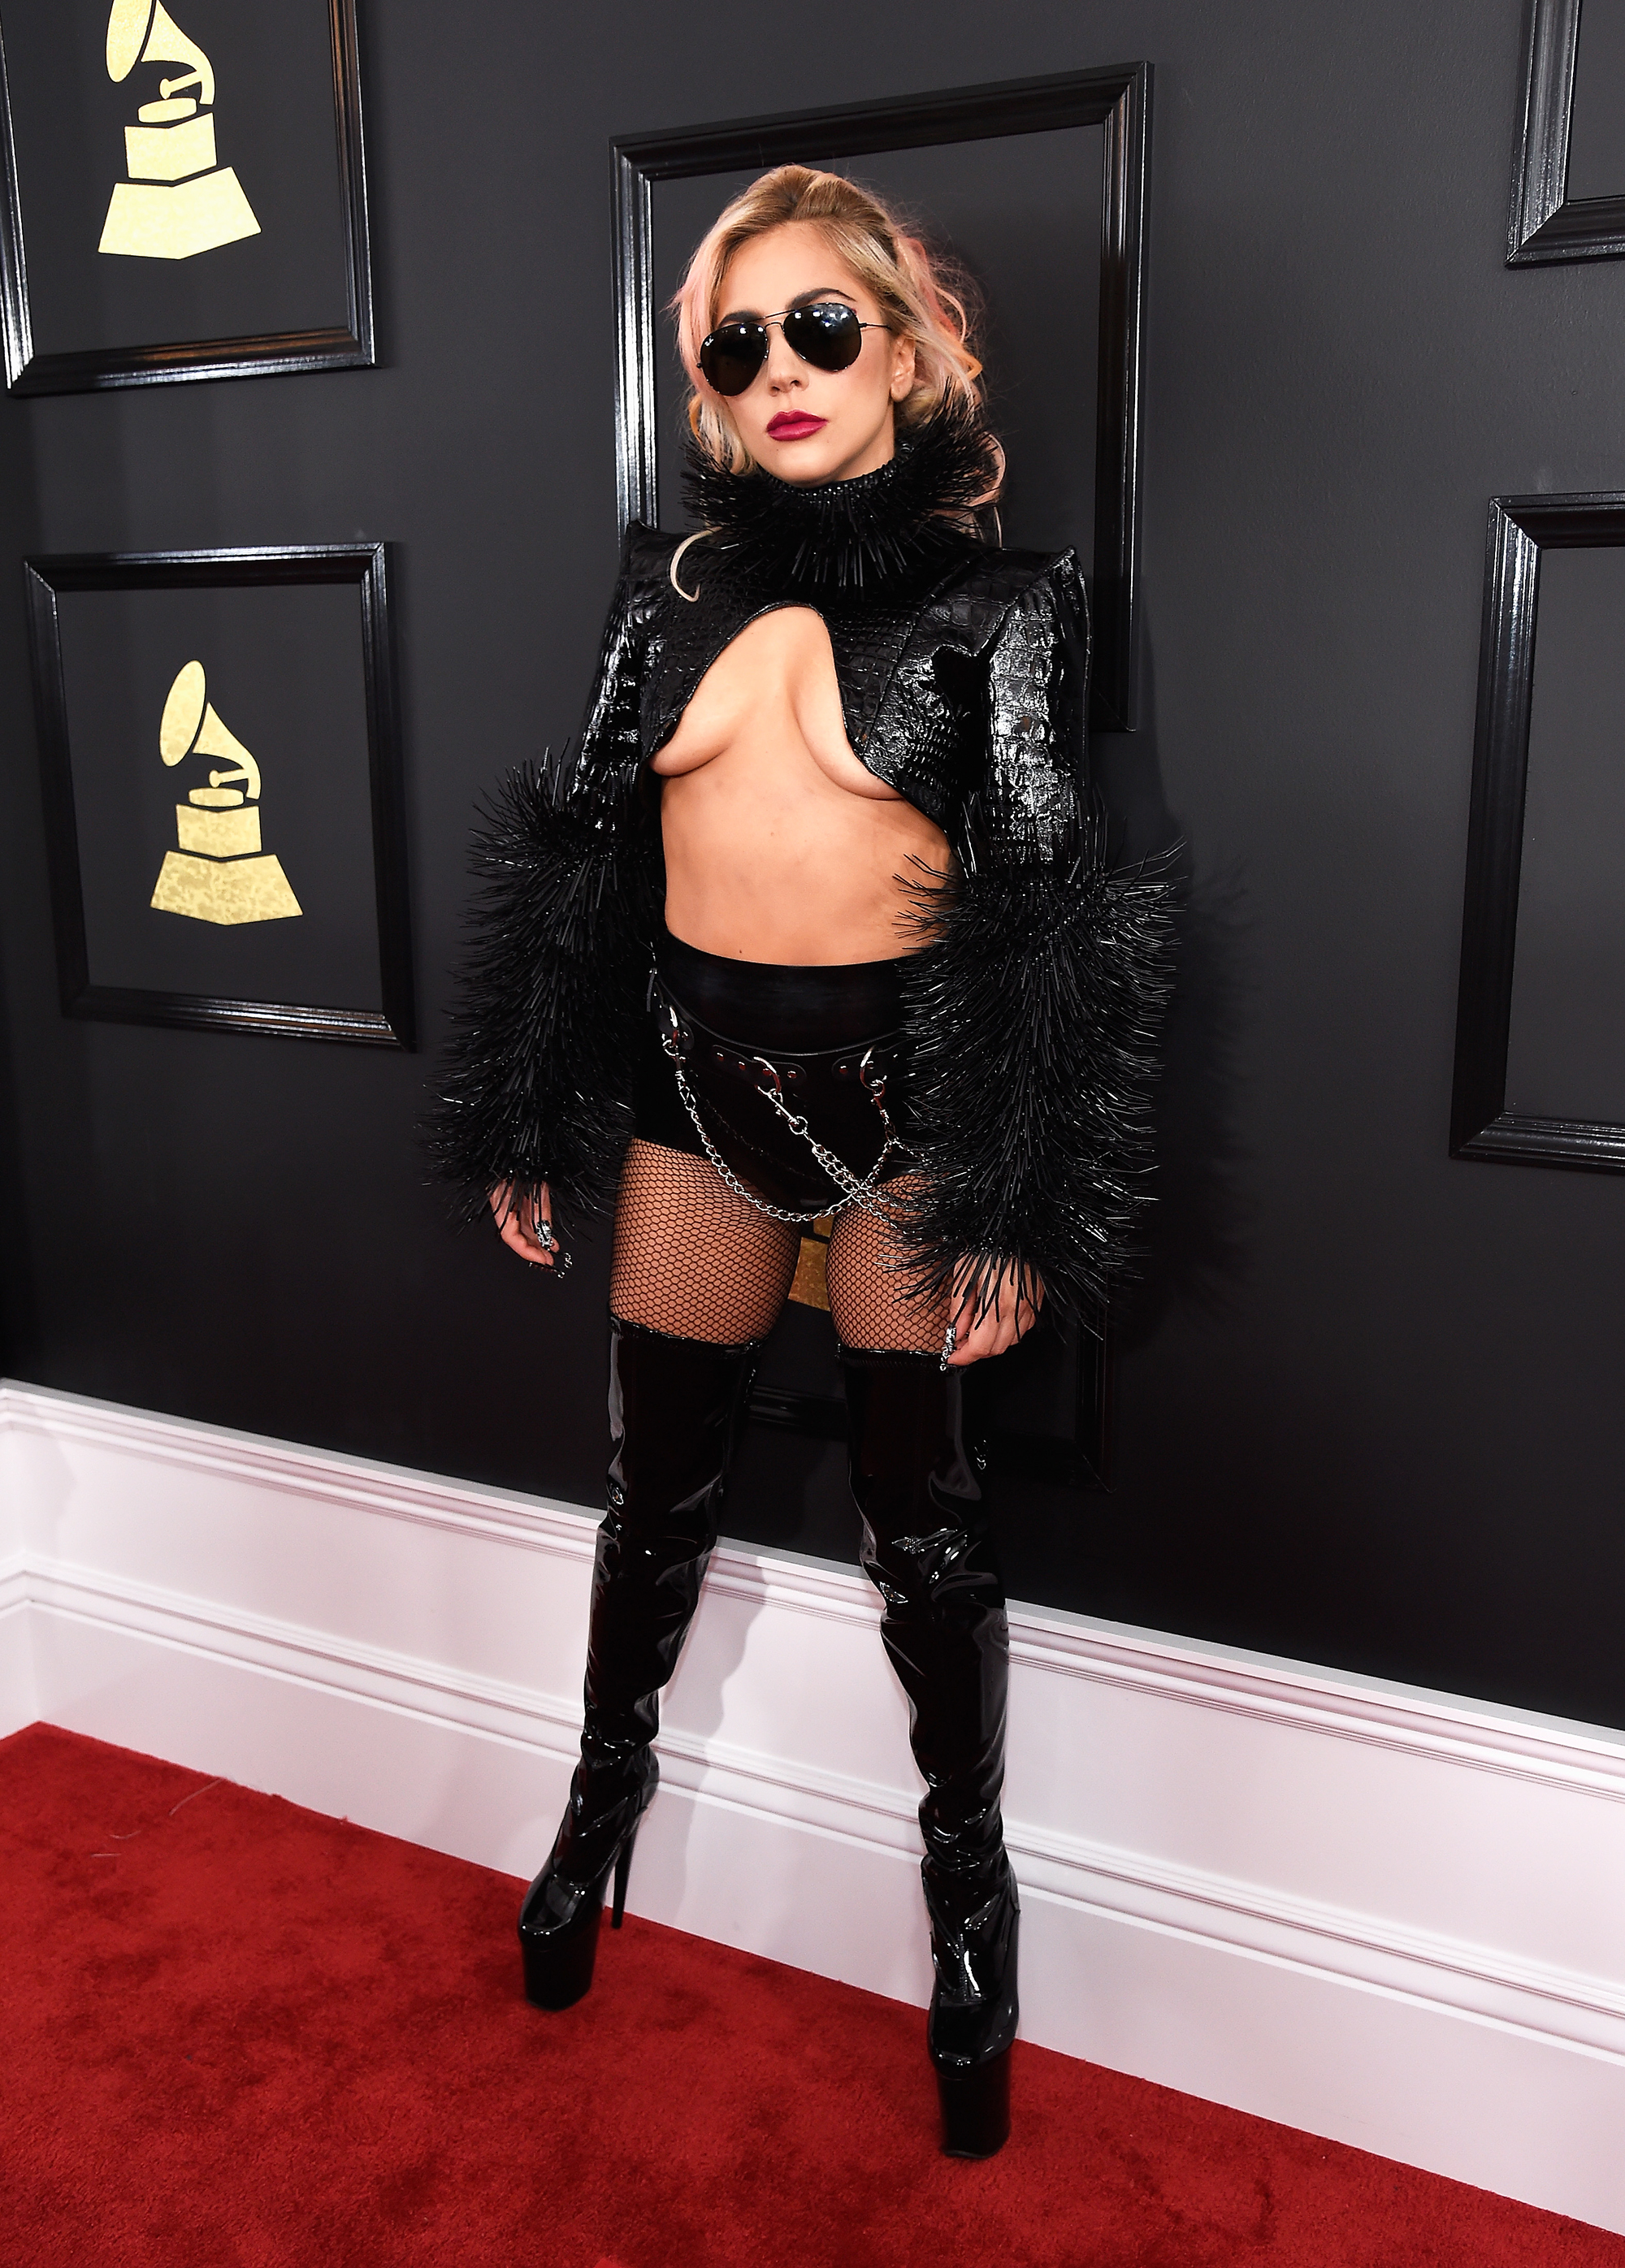 Lady Gaga attends the 59th GRAMMY Awards at STAPLES Center, on Feb. 12, 2017 in Los Angeles.